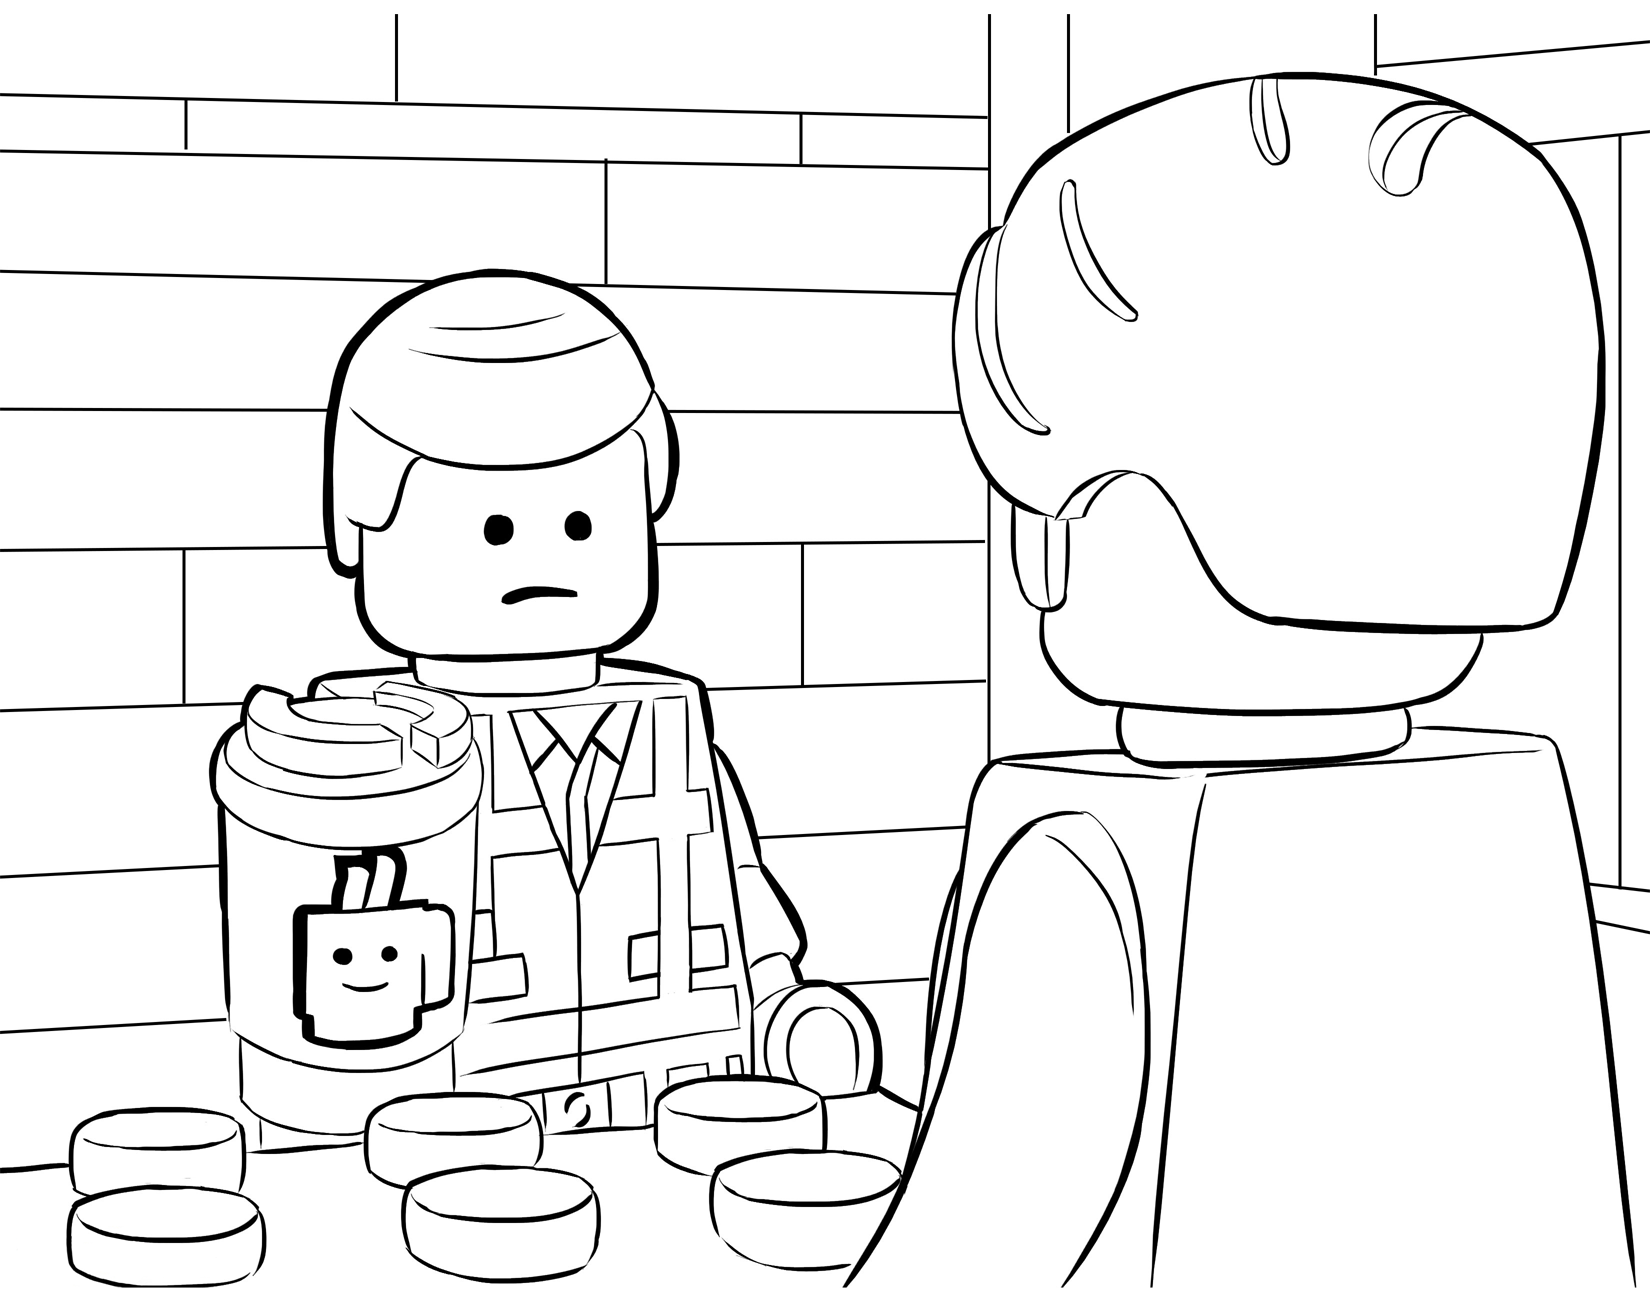 The LEGO Movie - Emmet looks in the mirror while breakfasting